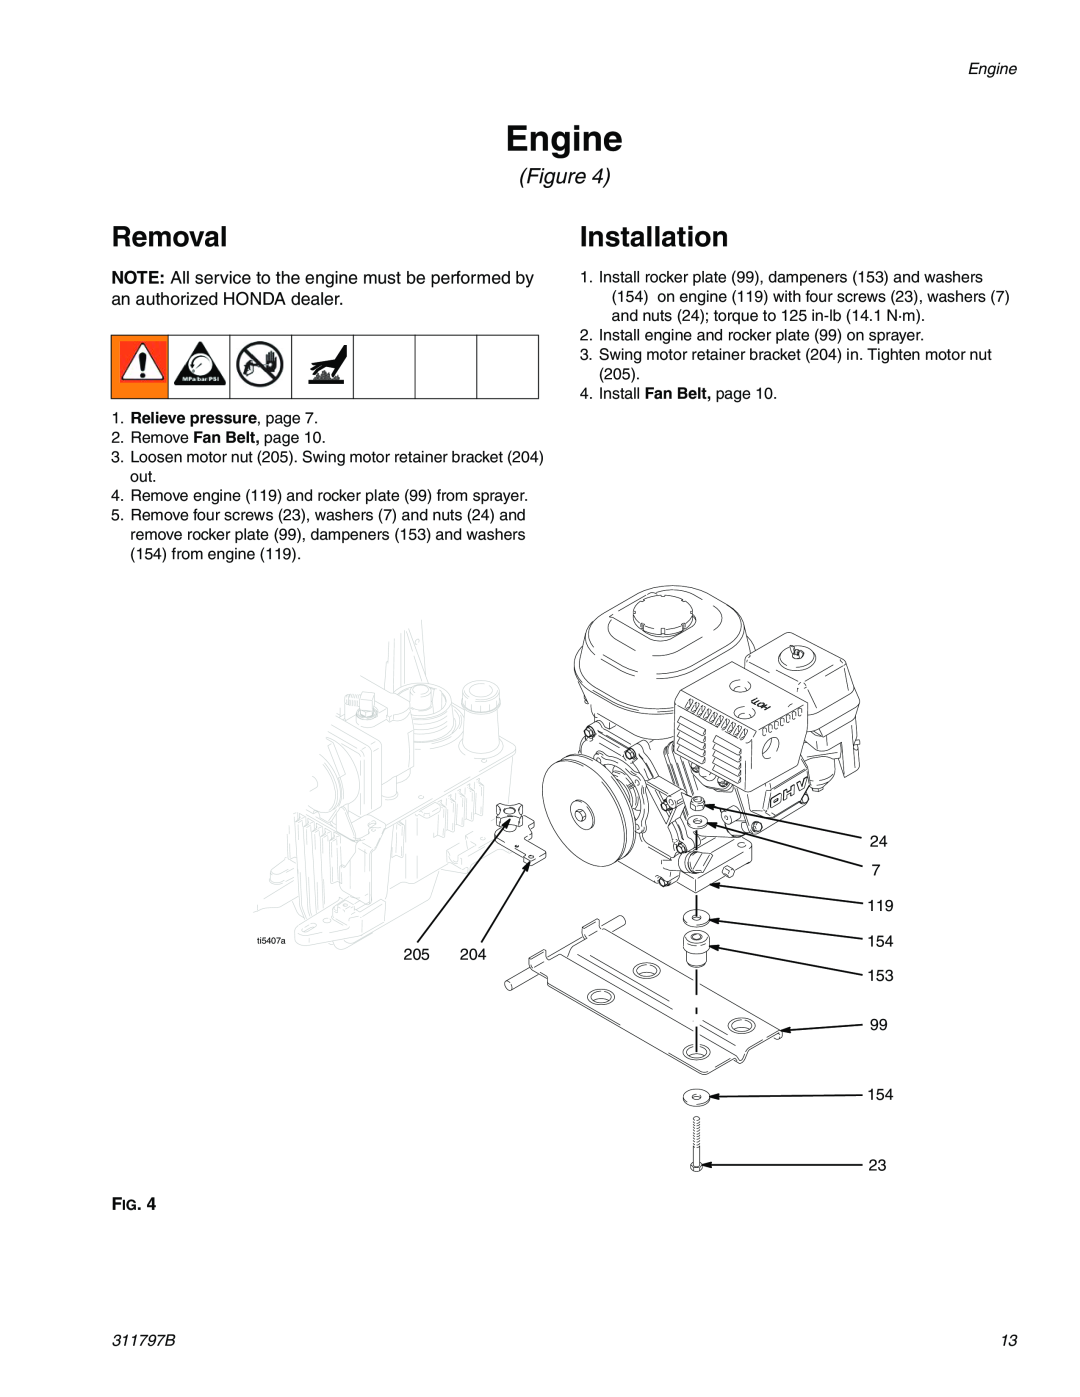 Uniden GH 200, GH 230, GH 130, GH 300 Engine, Removal, Installation, Relieve pressure, page, 311797B 